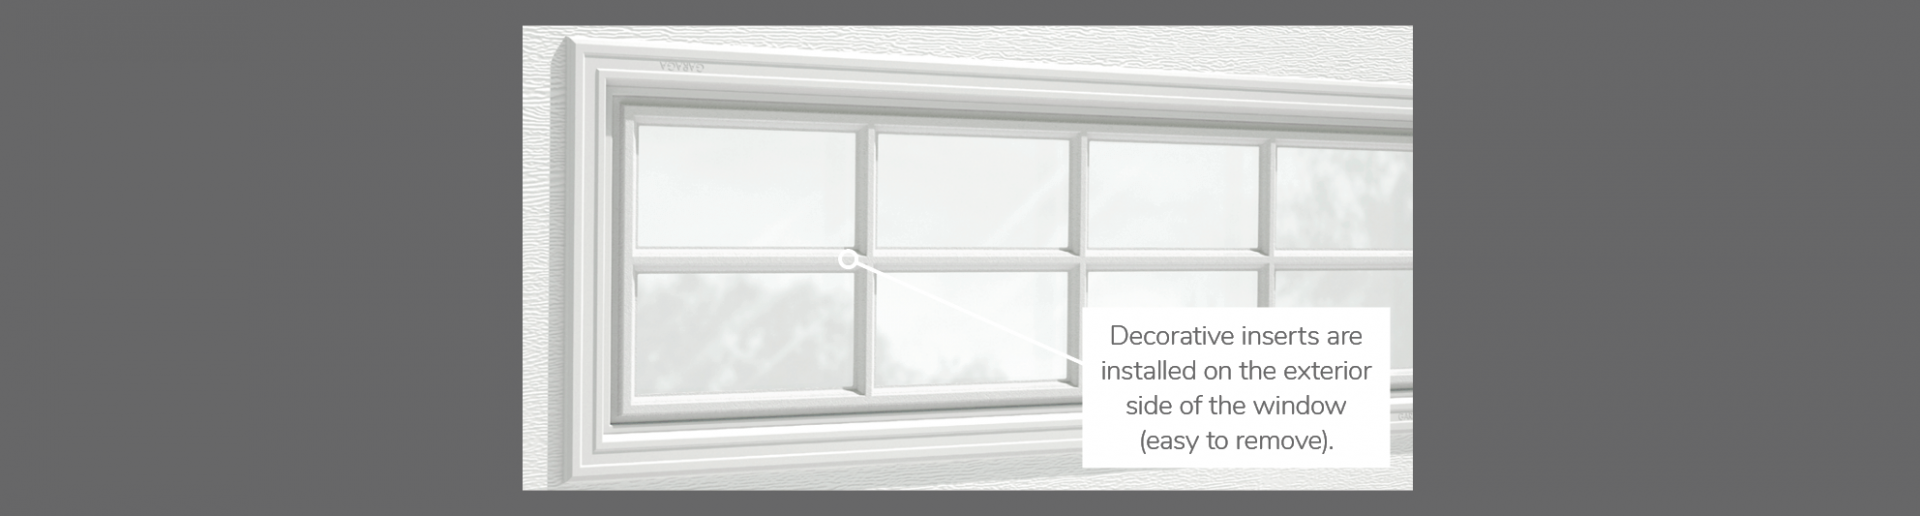 Stockton Decorative Insert, 40" x 13", available for door R-16